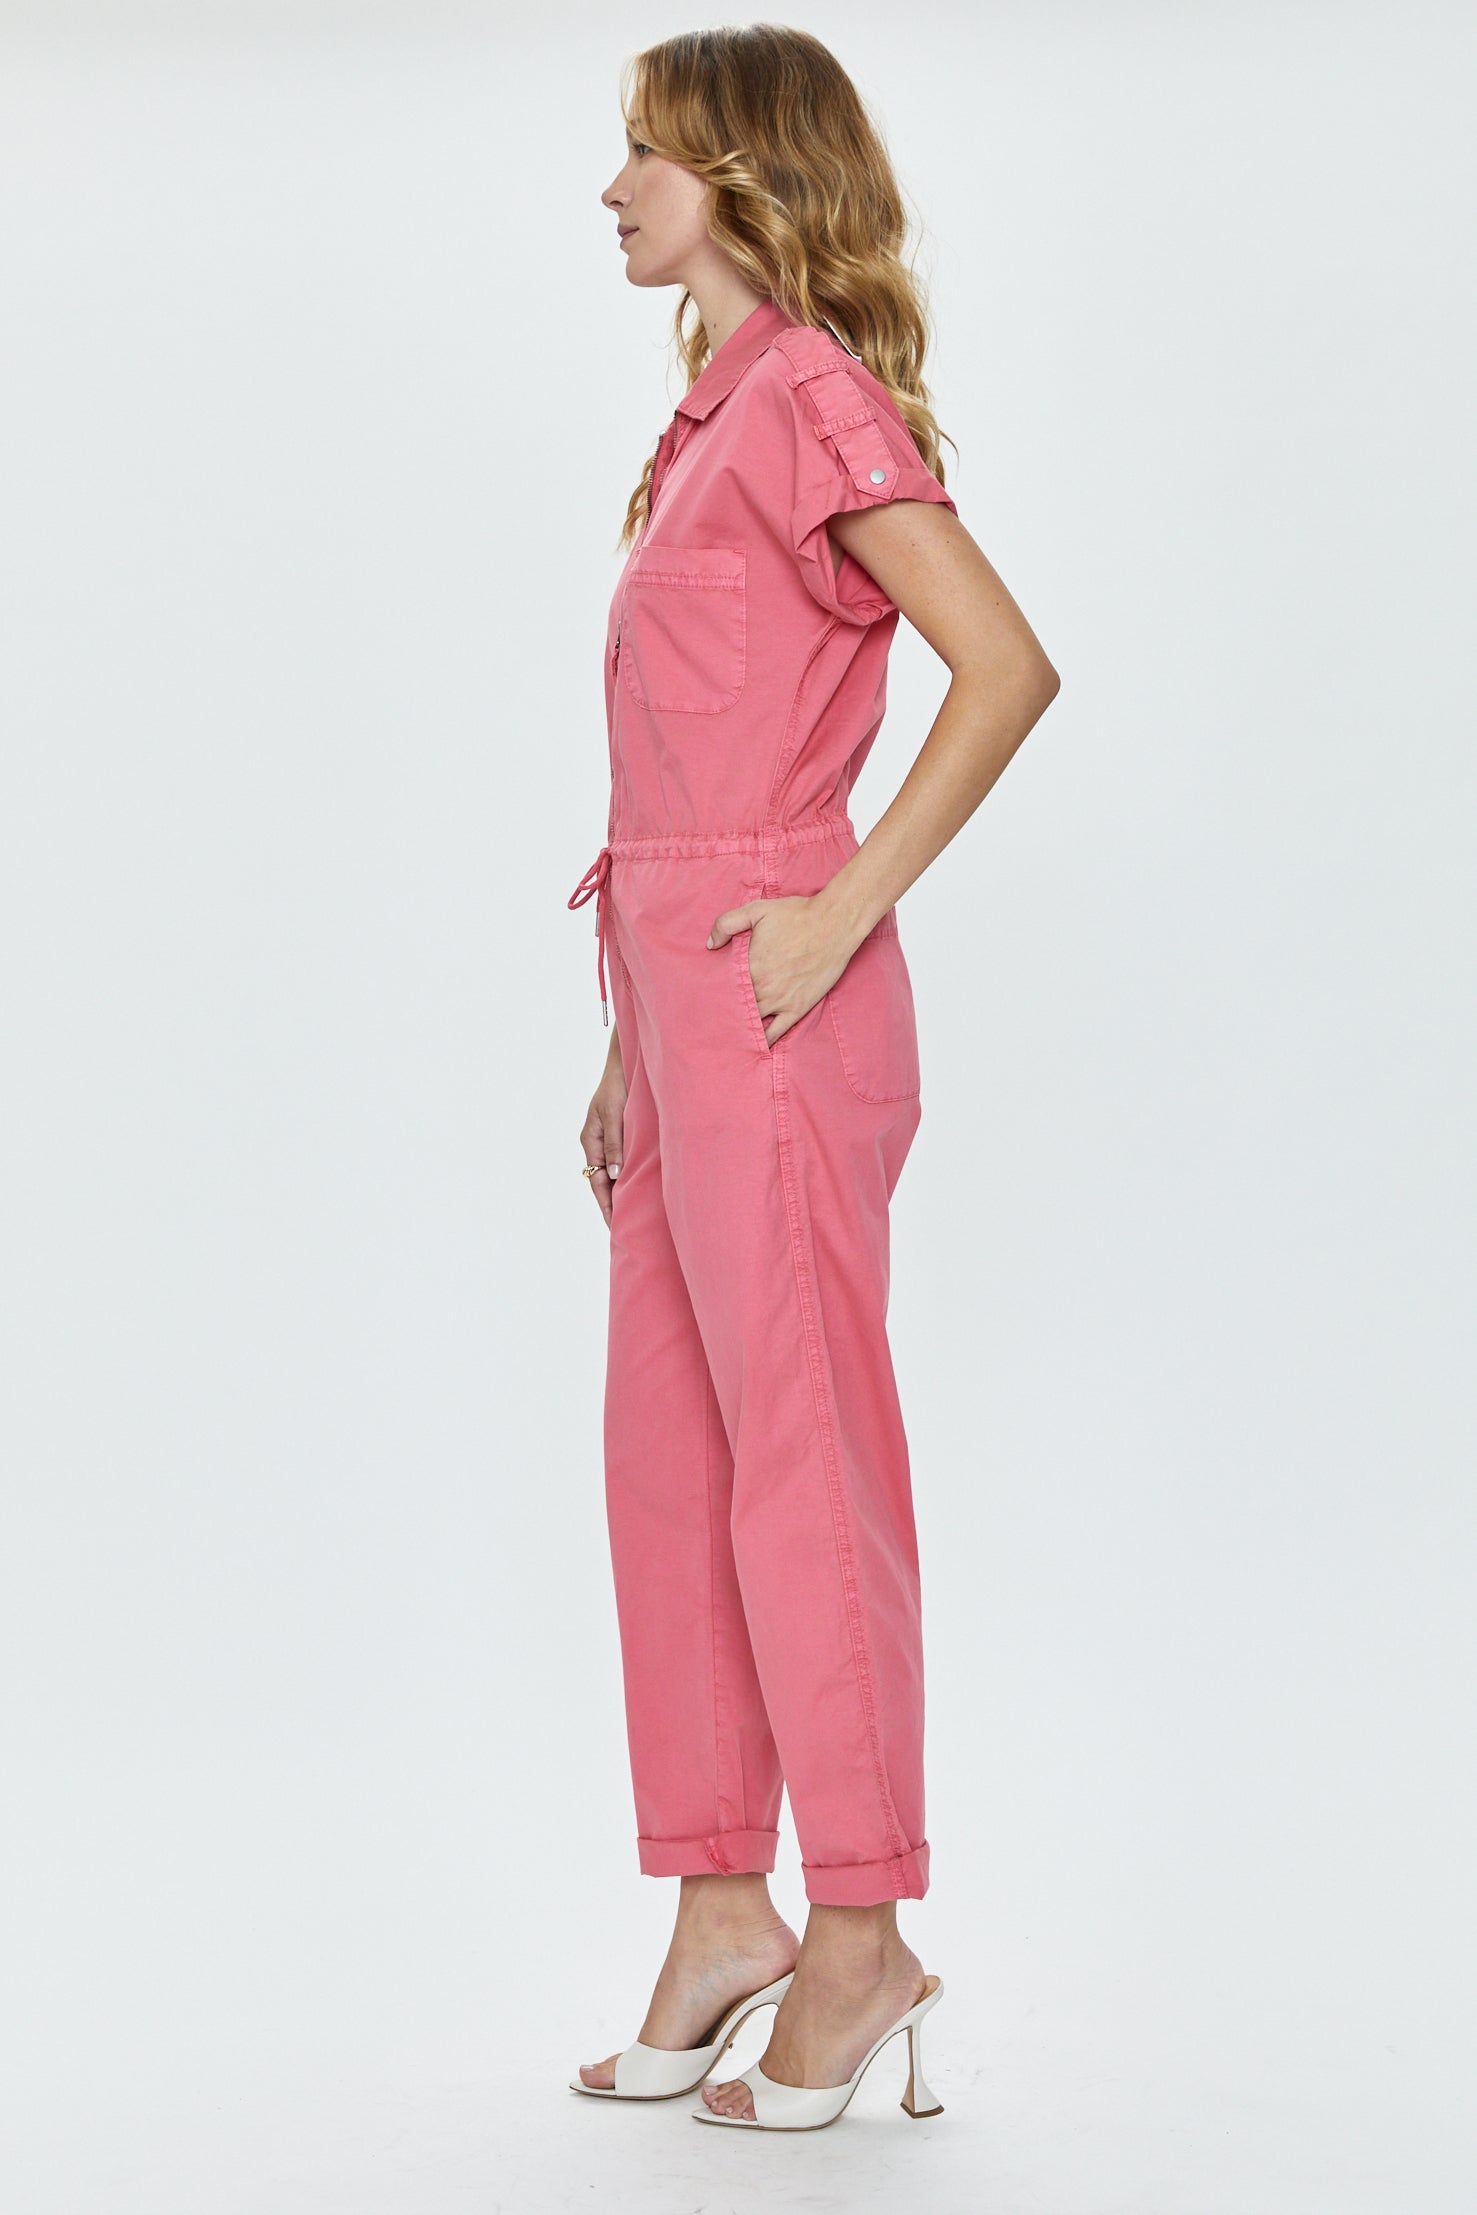 Shop All Jumpsuits and Rompers  PISTOLA – Tagged pink – Pistola